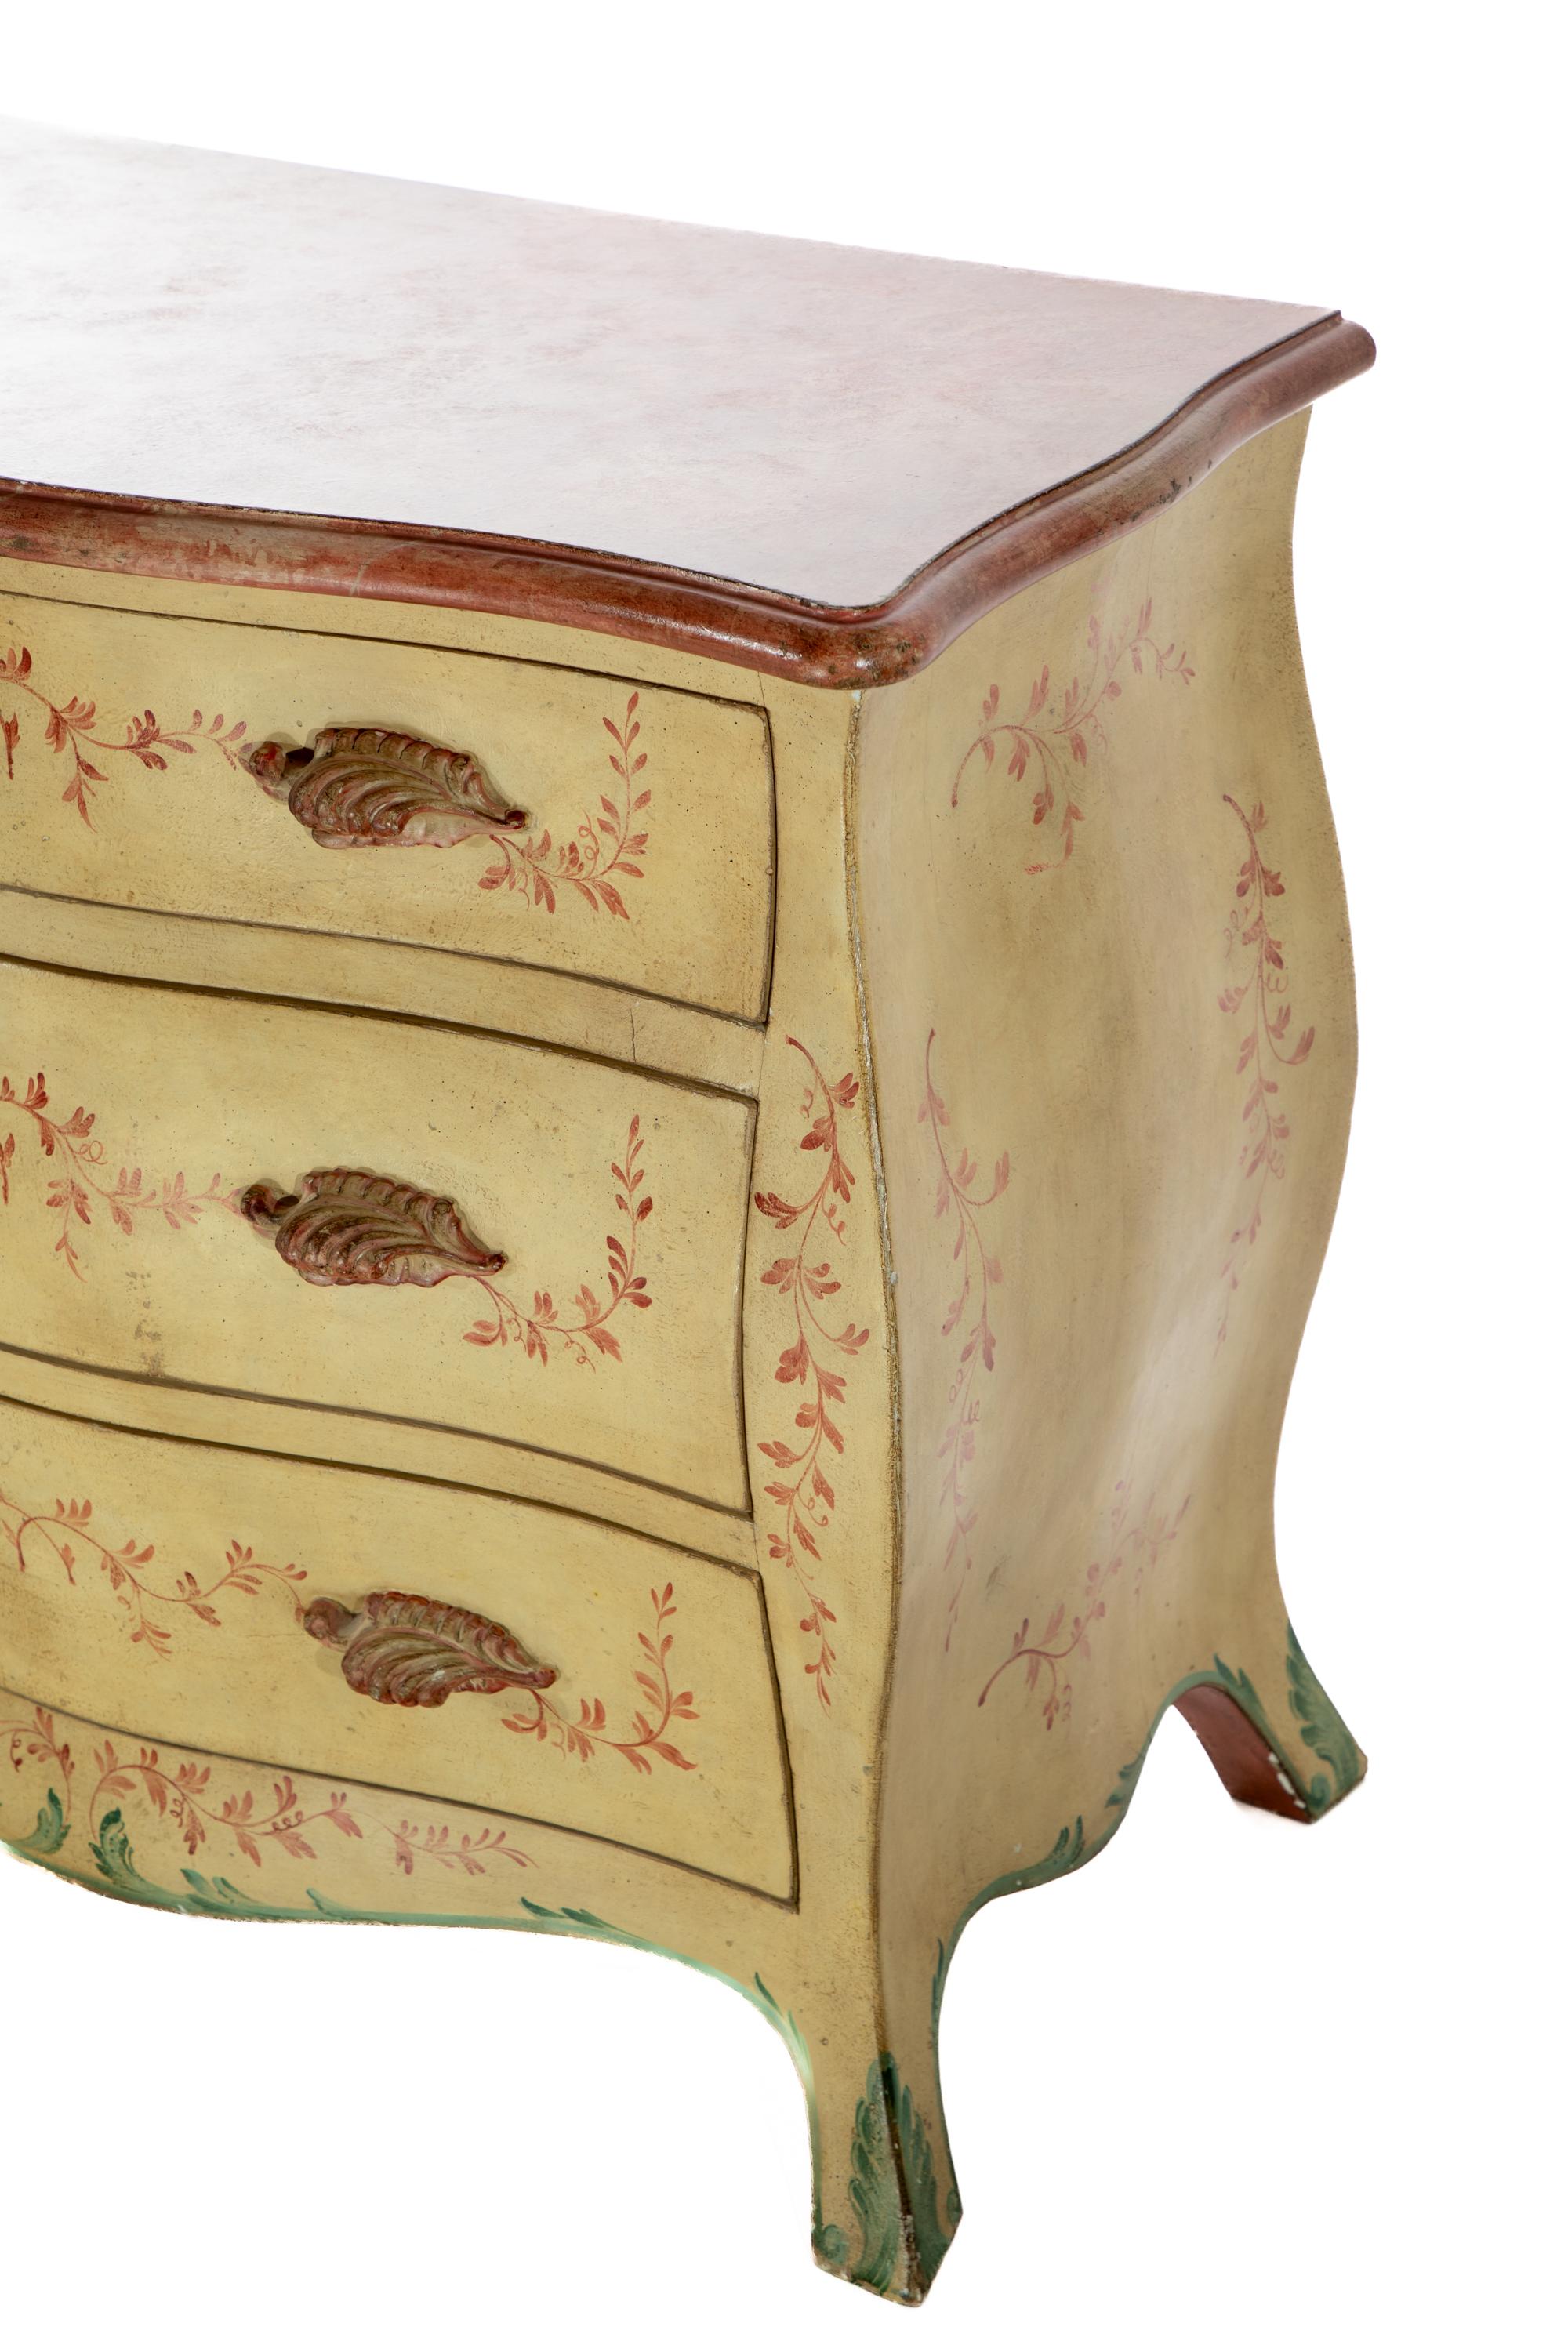 Beautiful Veneto chest by Patina (Italy)
Hand painted detail inside and out.  